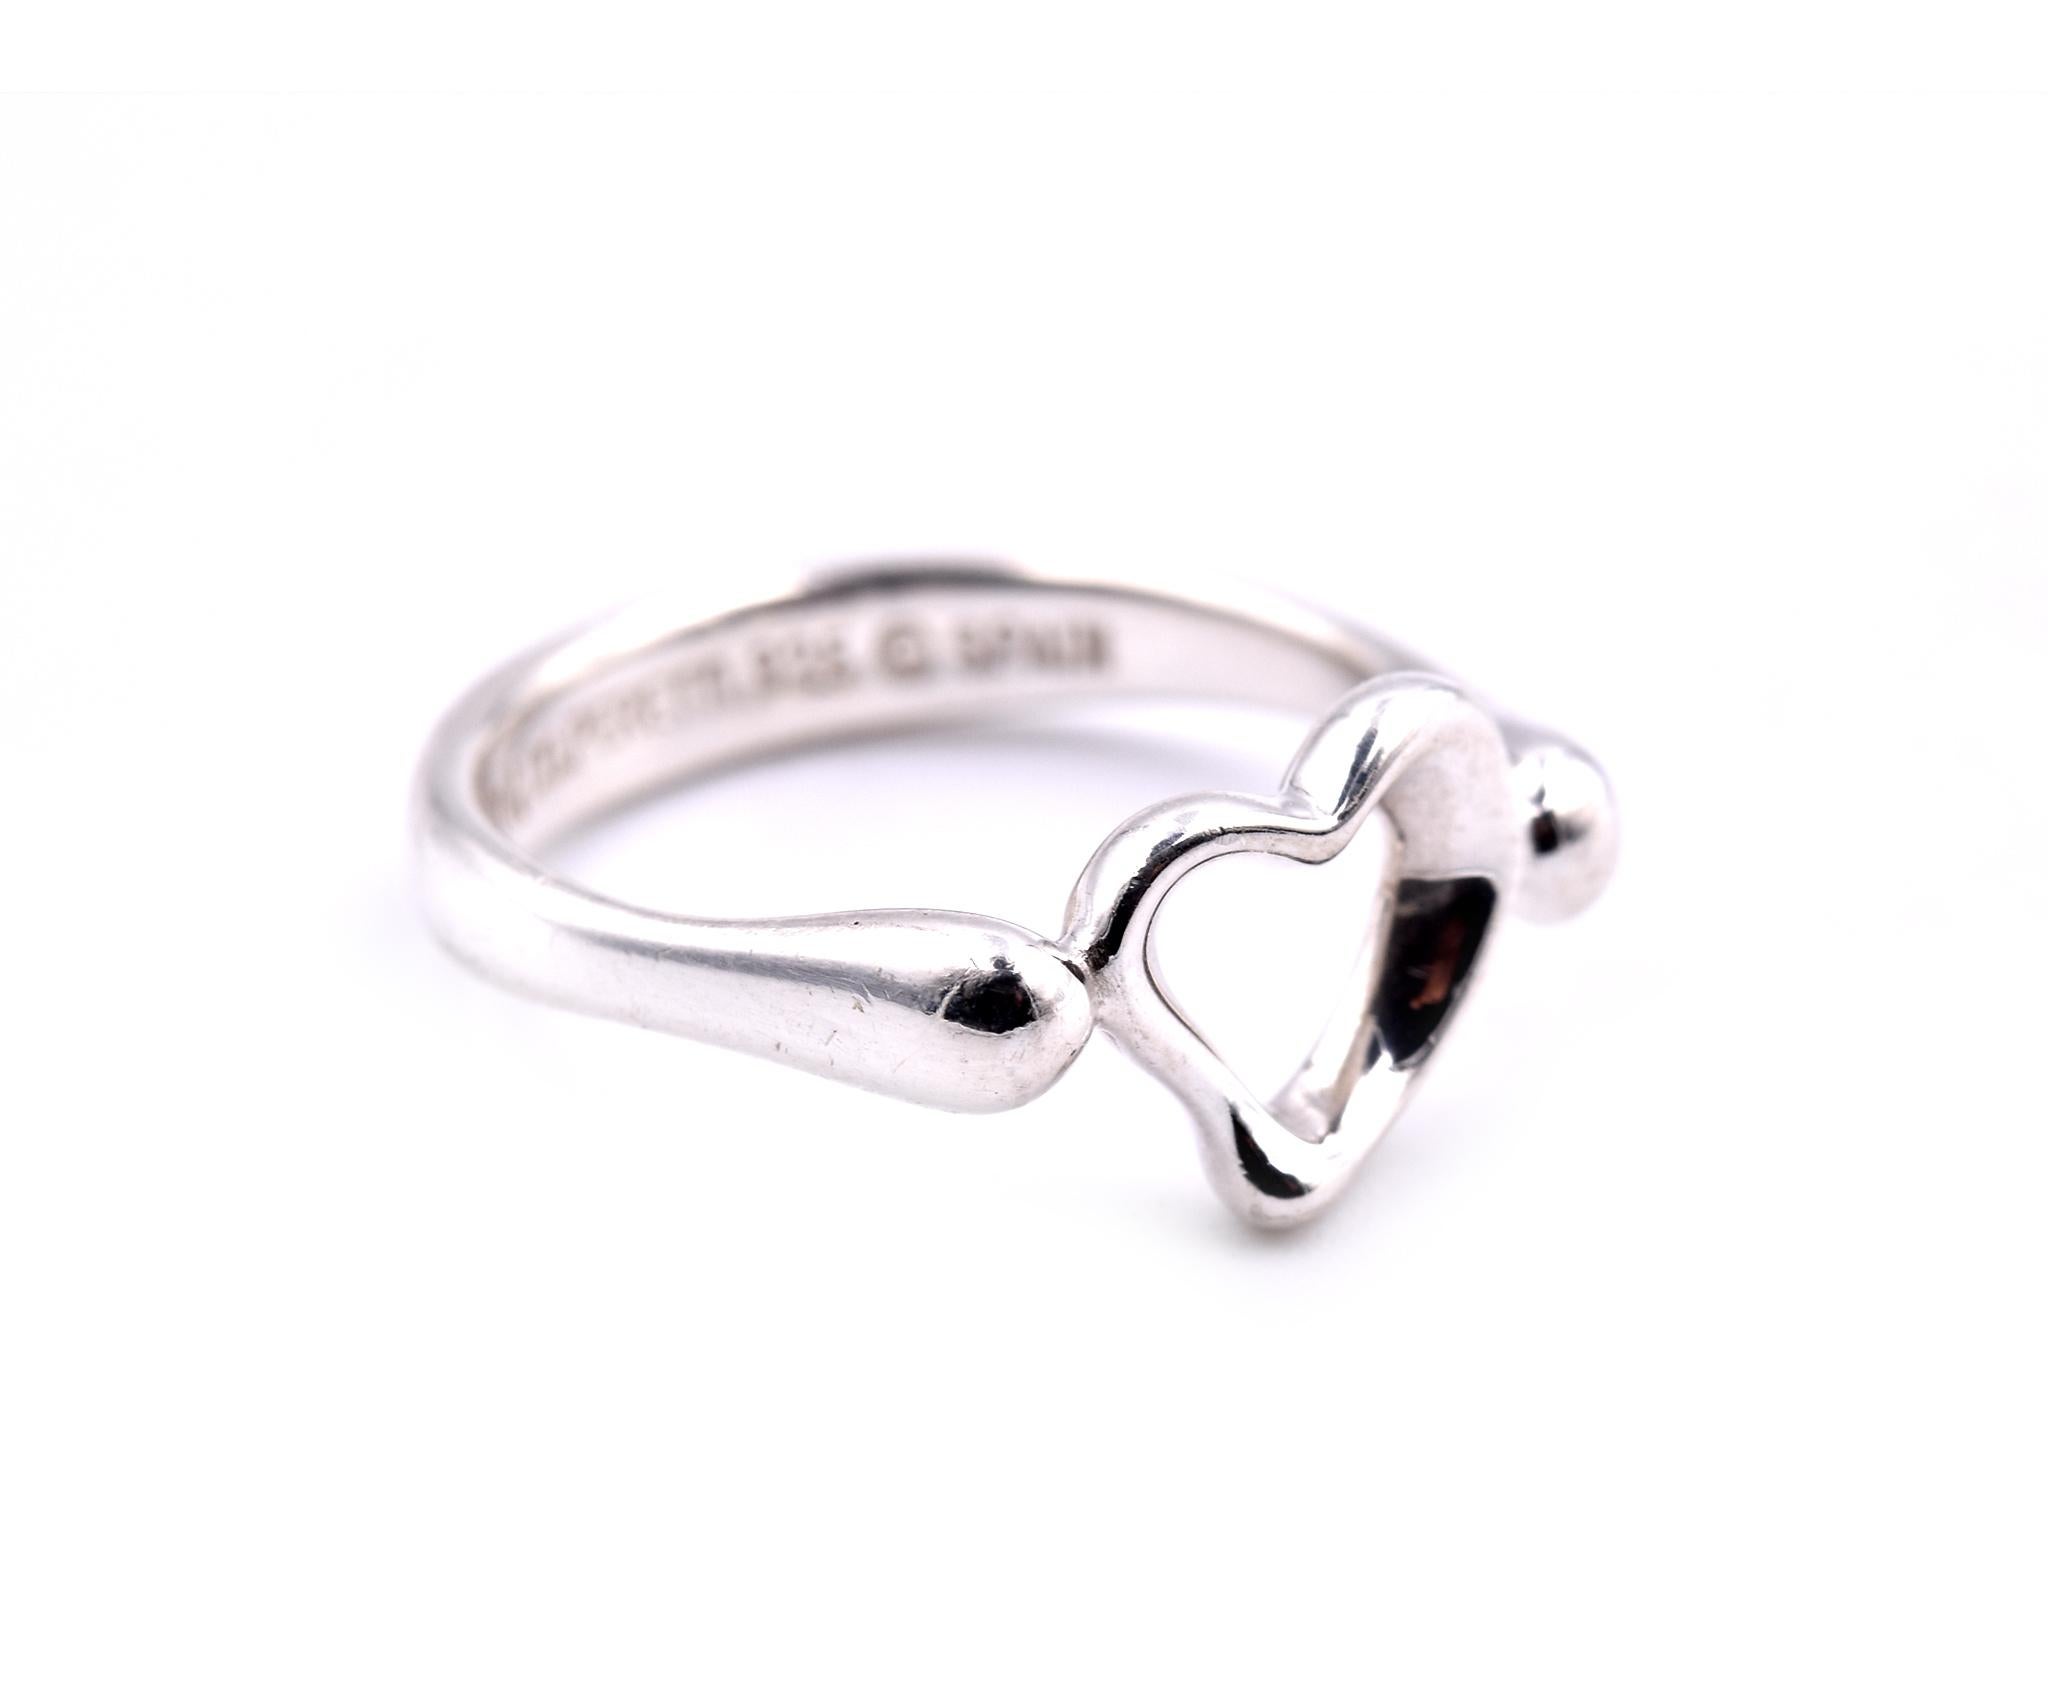 Designer: Tiffany & Co
Material: sterling silver
Dimensions: ring top is 18.31mm wide
Ring Size: 5 ¼ (please allow two additional shipping days for sizing requests)
Weight: 2.50 grams